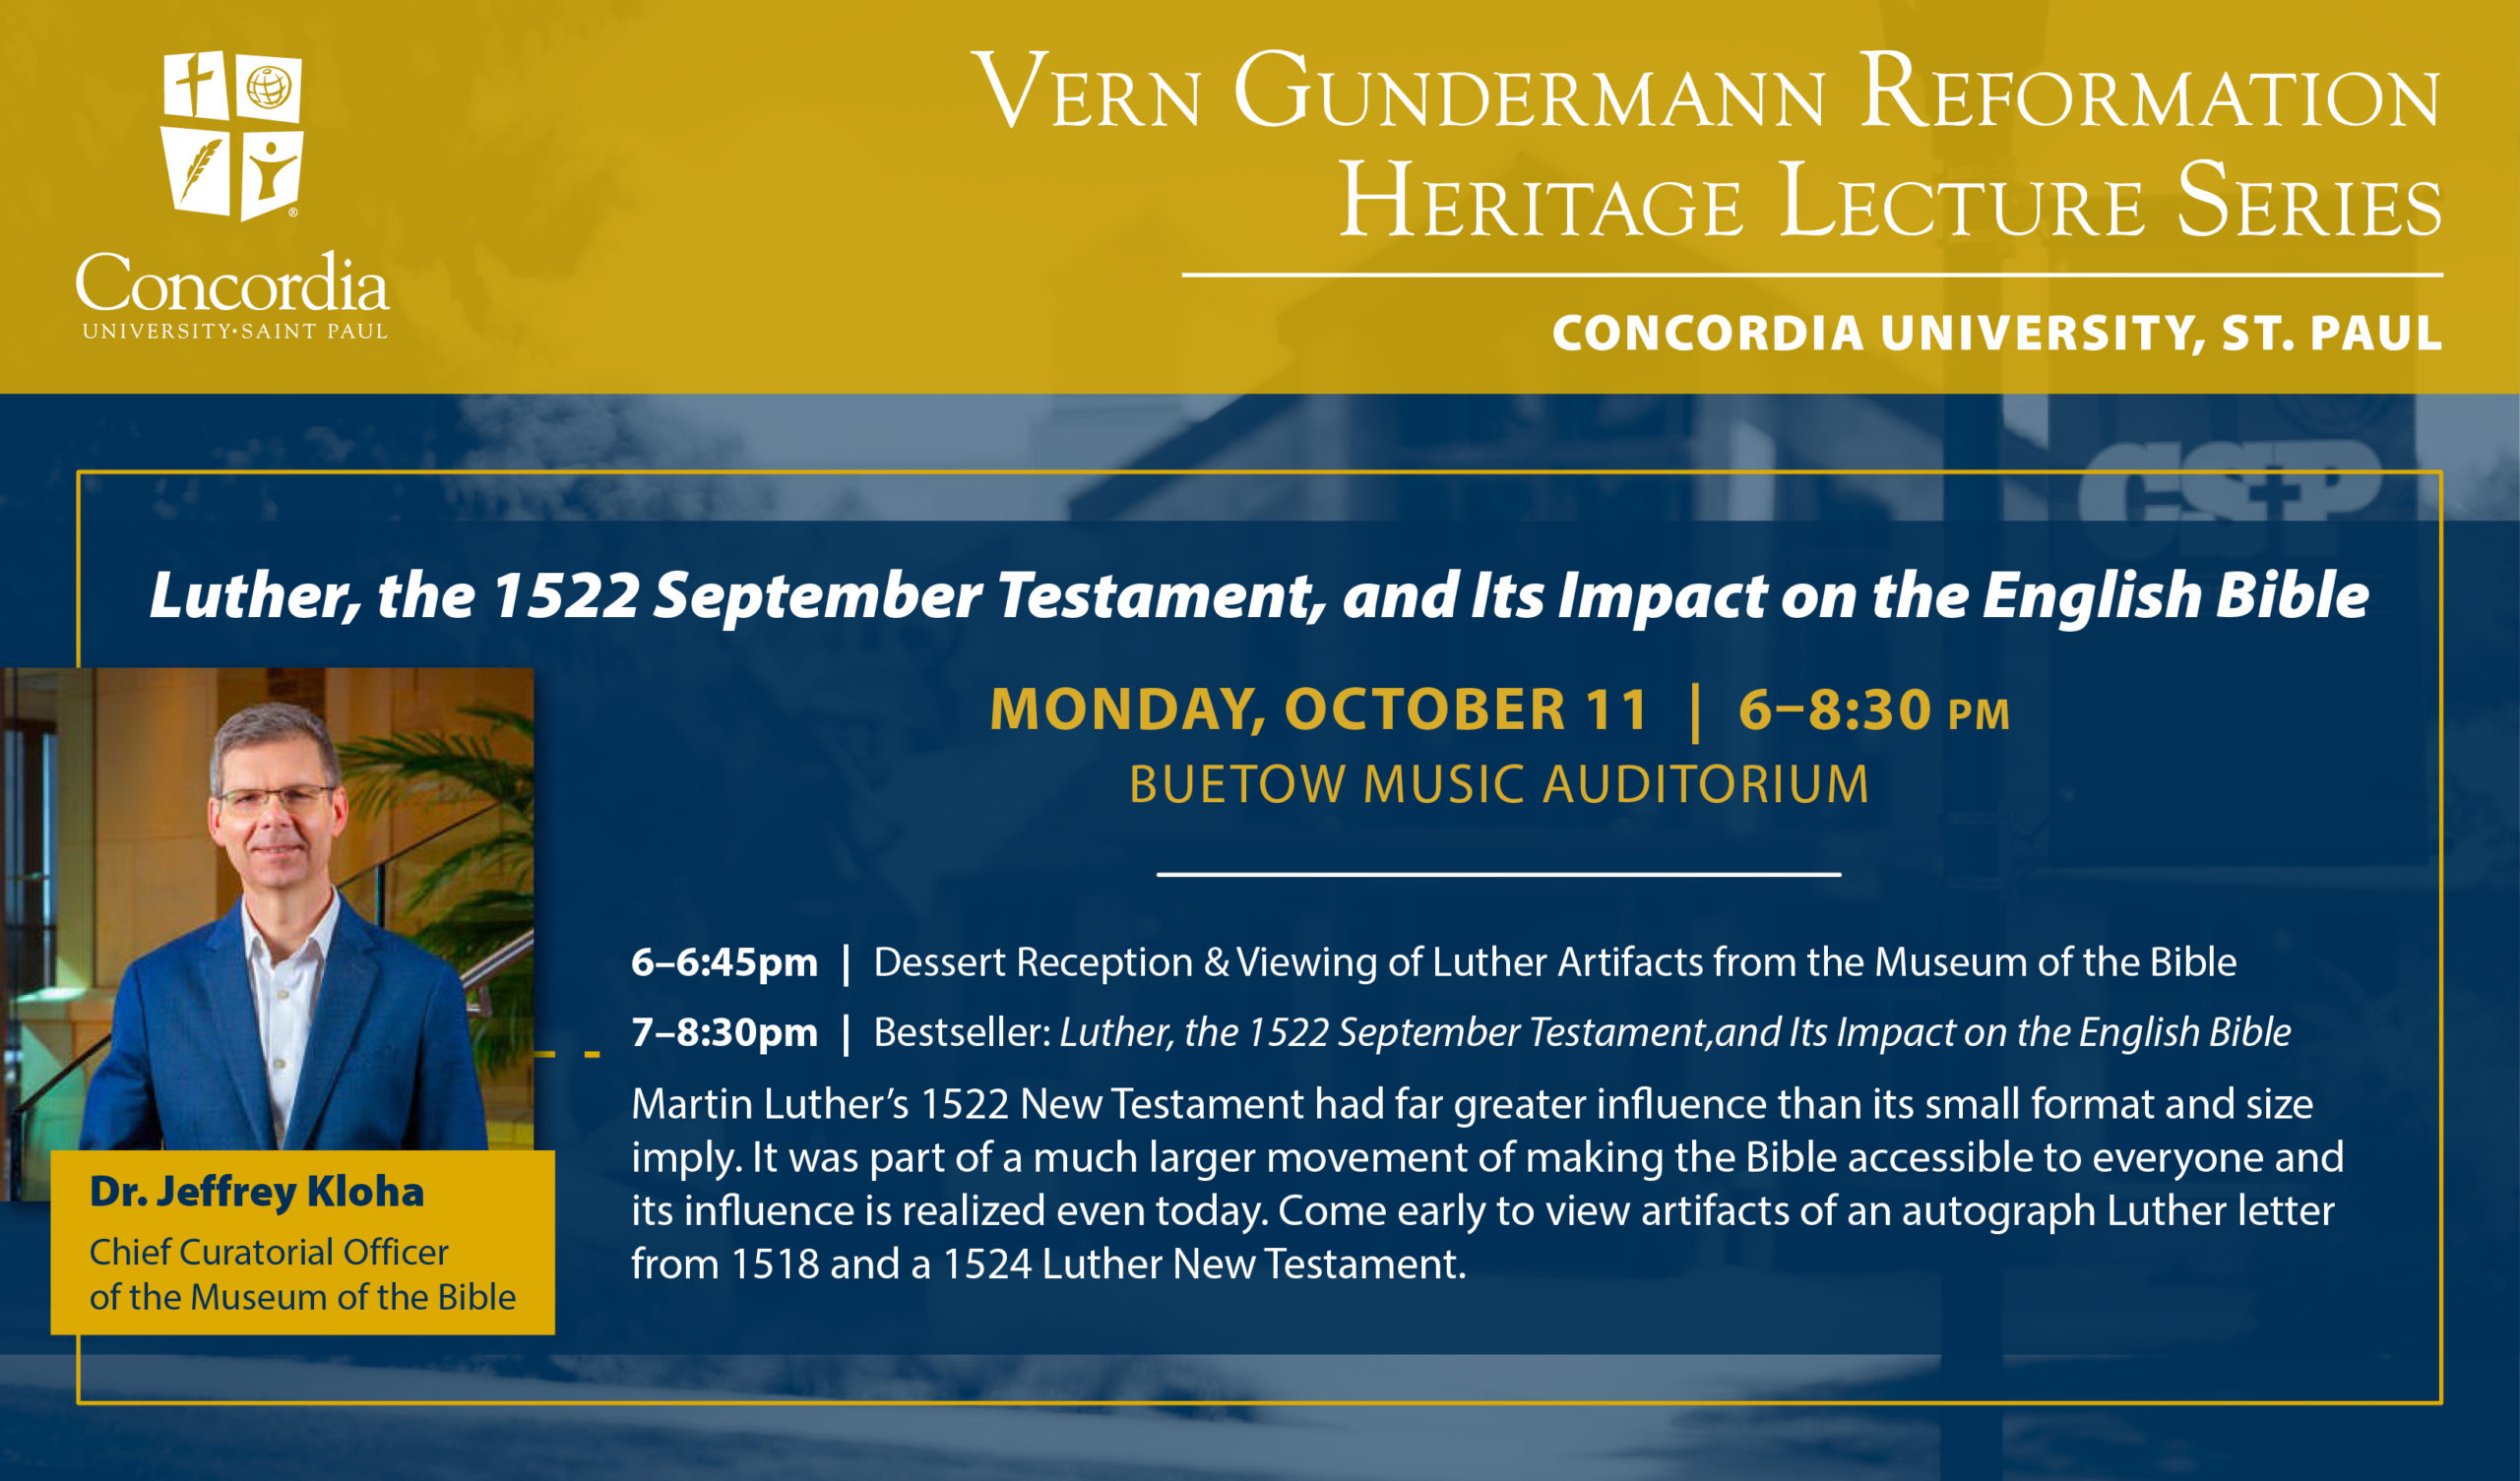 Reformation Heritage Lecture